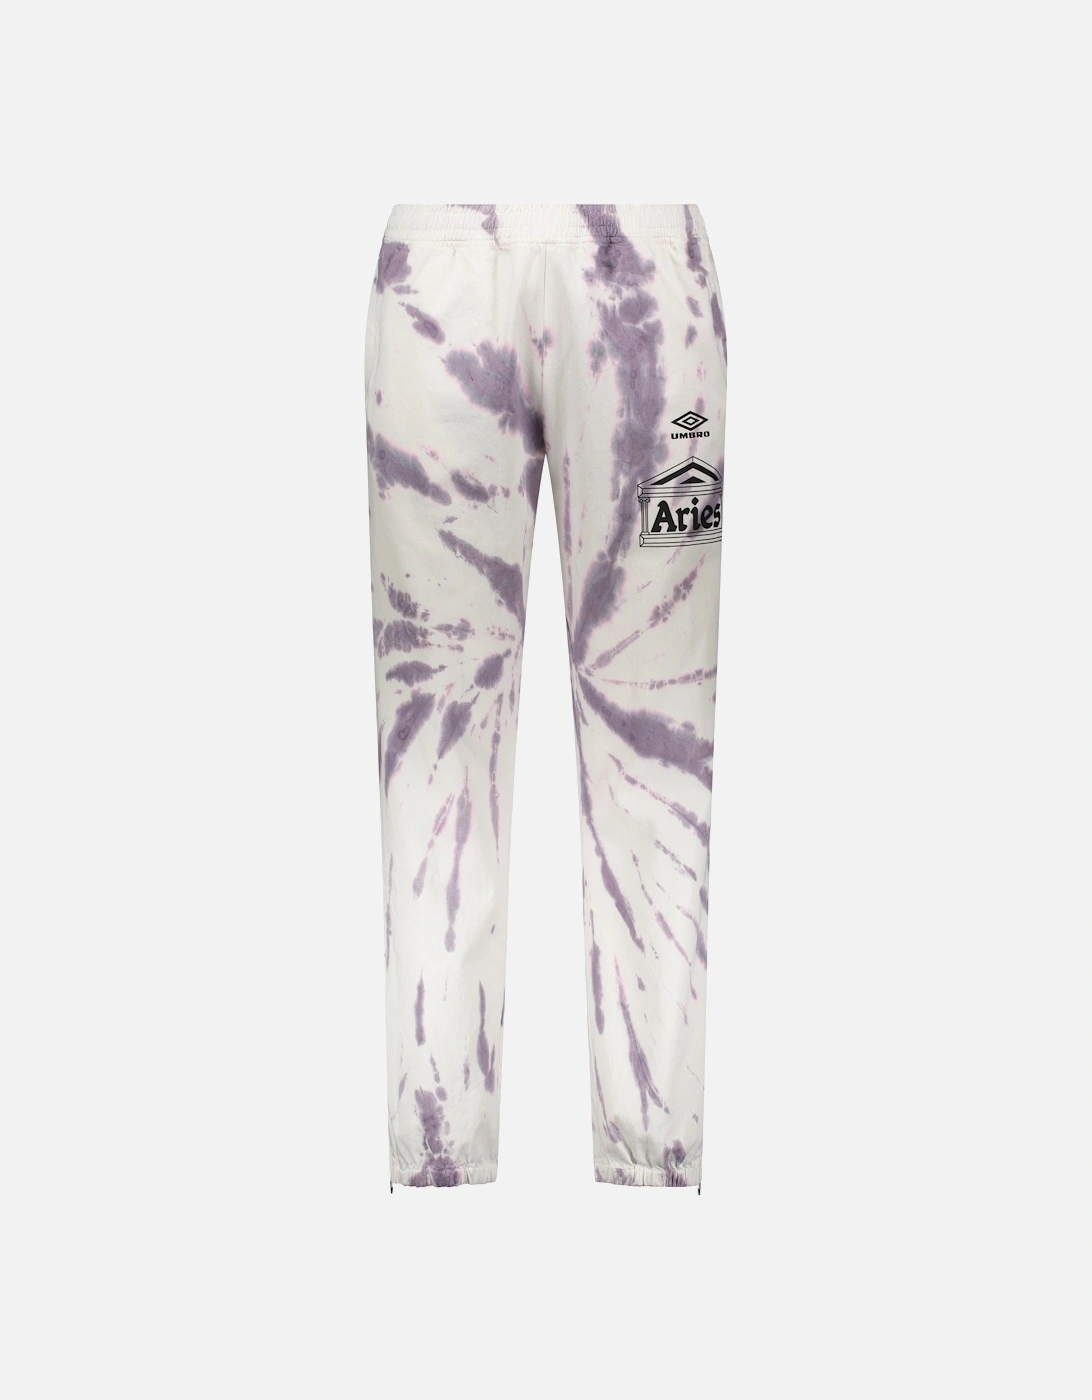 Ariew x Umbro Tie Dye Pro 64  Pant - Dusk Spiral, 4 of 3